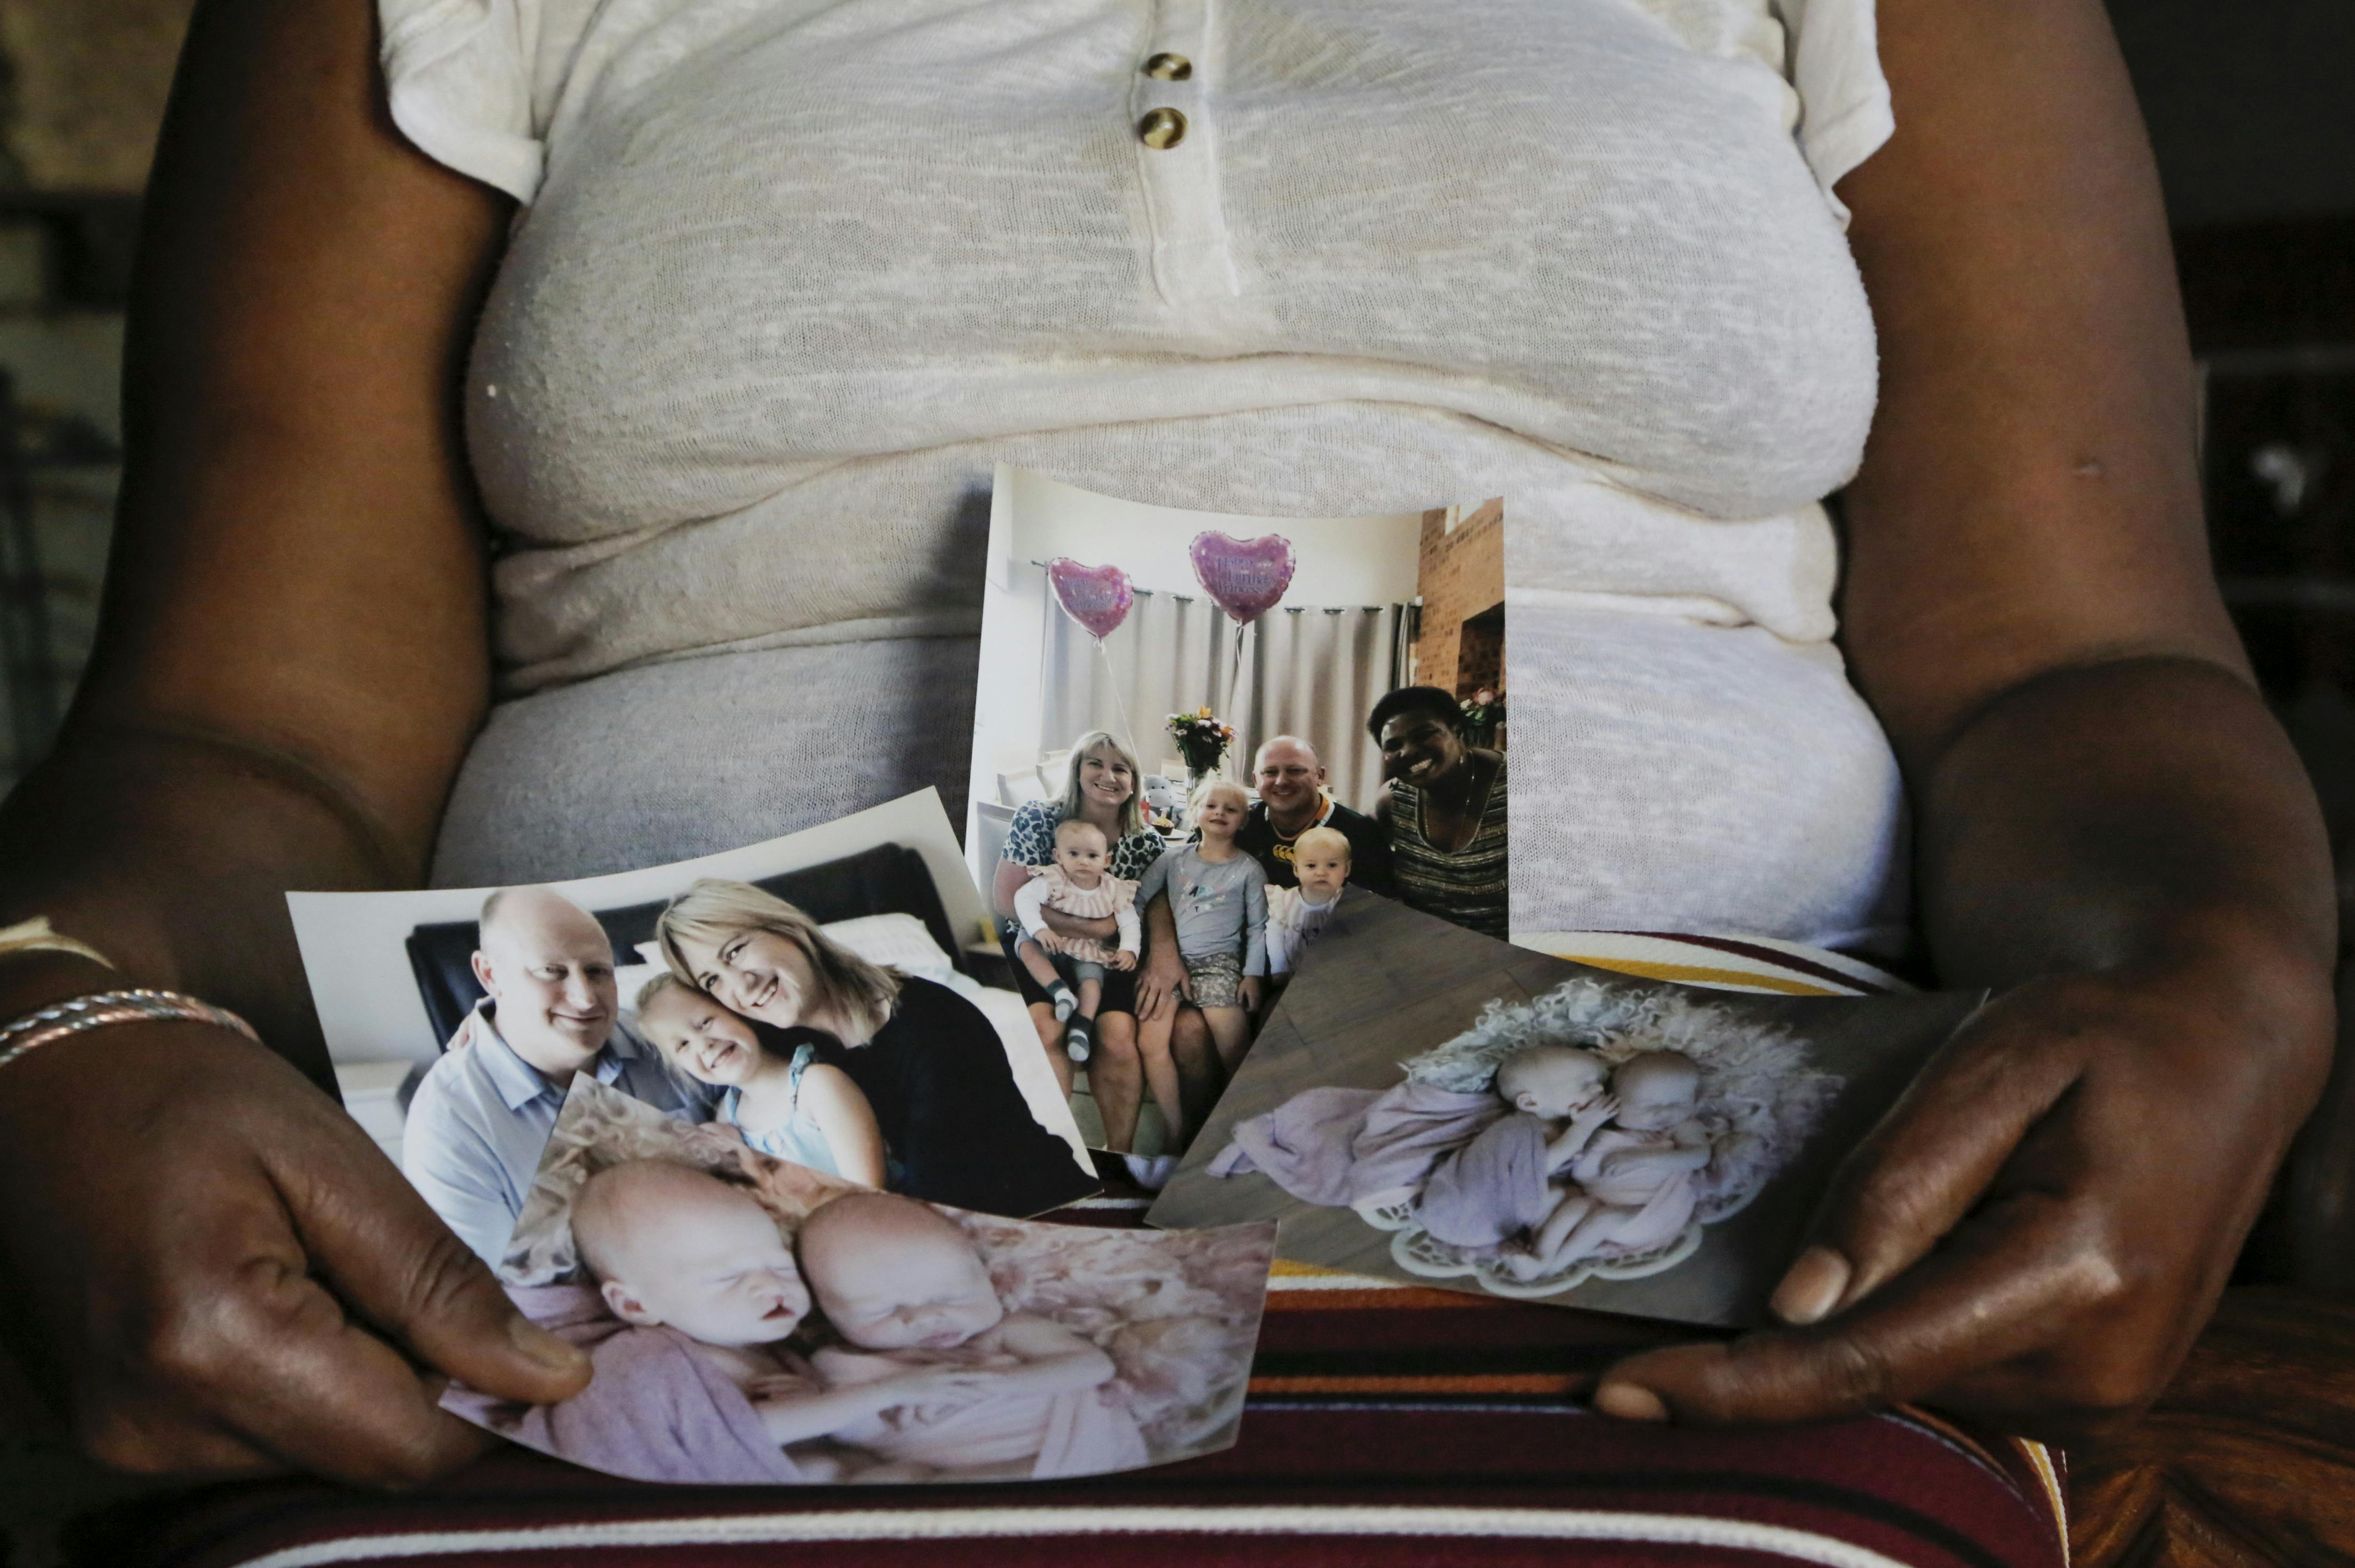 FILE - In this Sept. 17, 2021, file photo, Mandy Sibanyoni, nanny of the three daughters of Graham and Lauren Dickason, holds photographs of the Dickason family in her home in Pretoria, South Africa. People in the town of Timaru are planning an evening vigil outside the home of three young girls, Thursday, Sept. 23, 2021, who were killed last week in a crime that shocked New Zealand. The girls' mother Lauren Dickason has been charged with murder. (AP Photo/Sebabatso Mosamo, File)